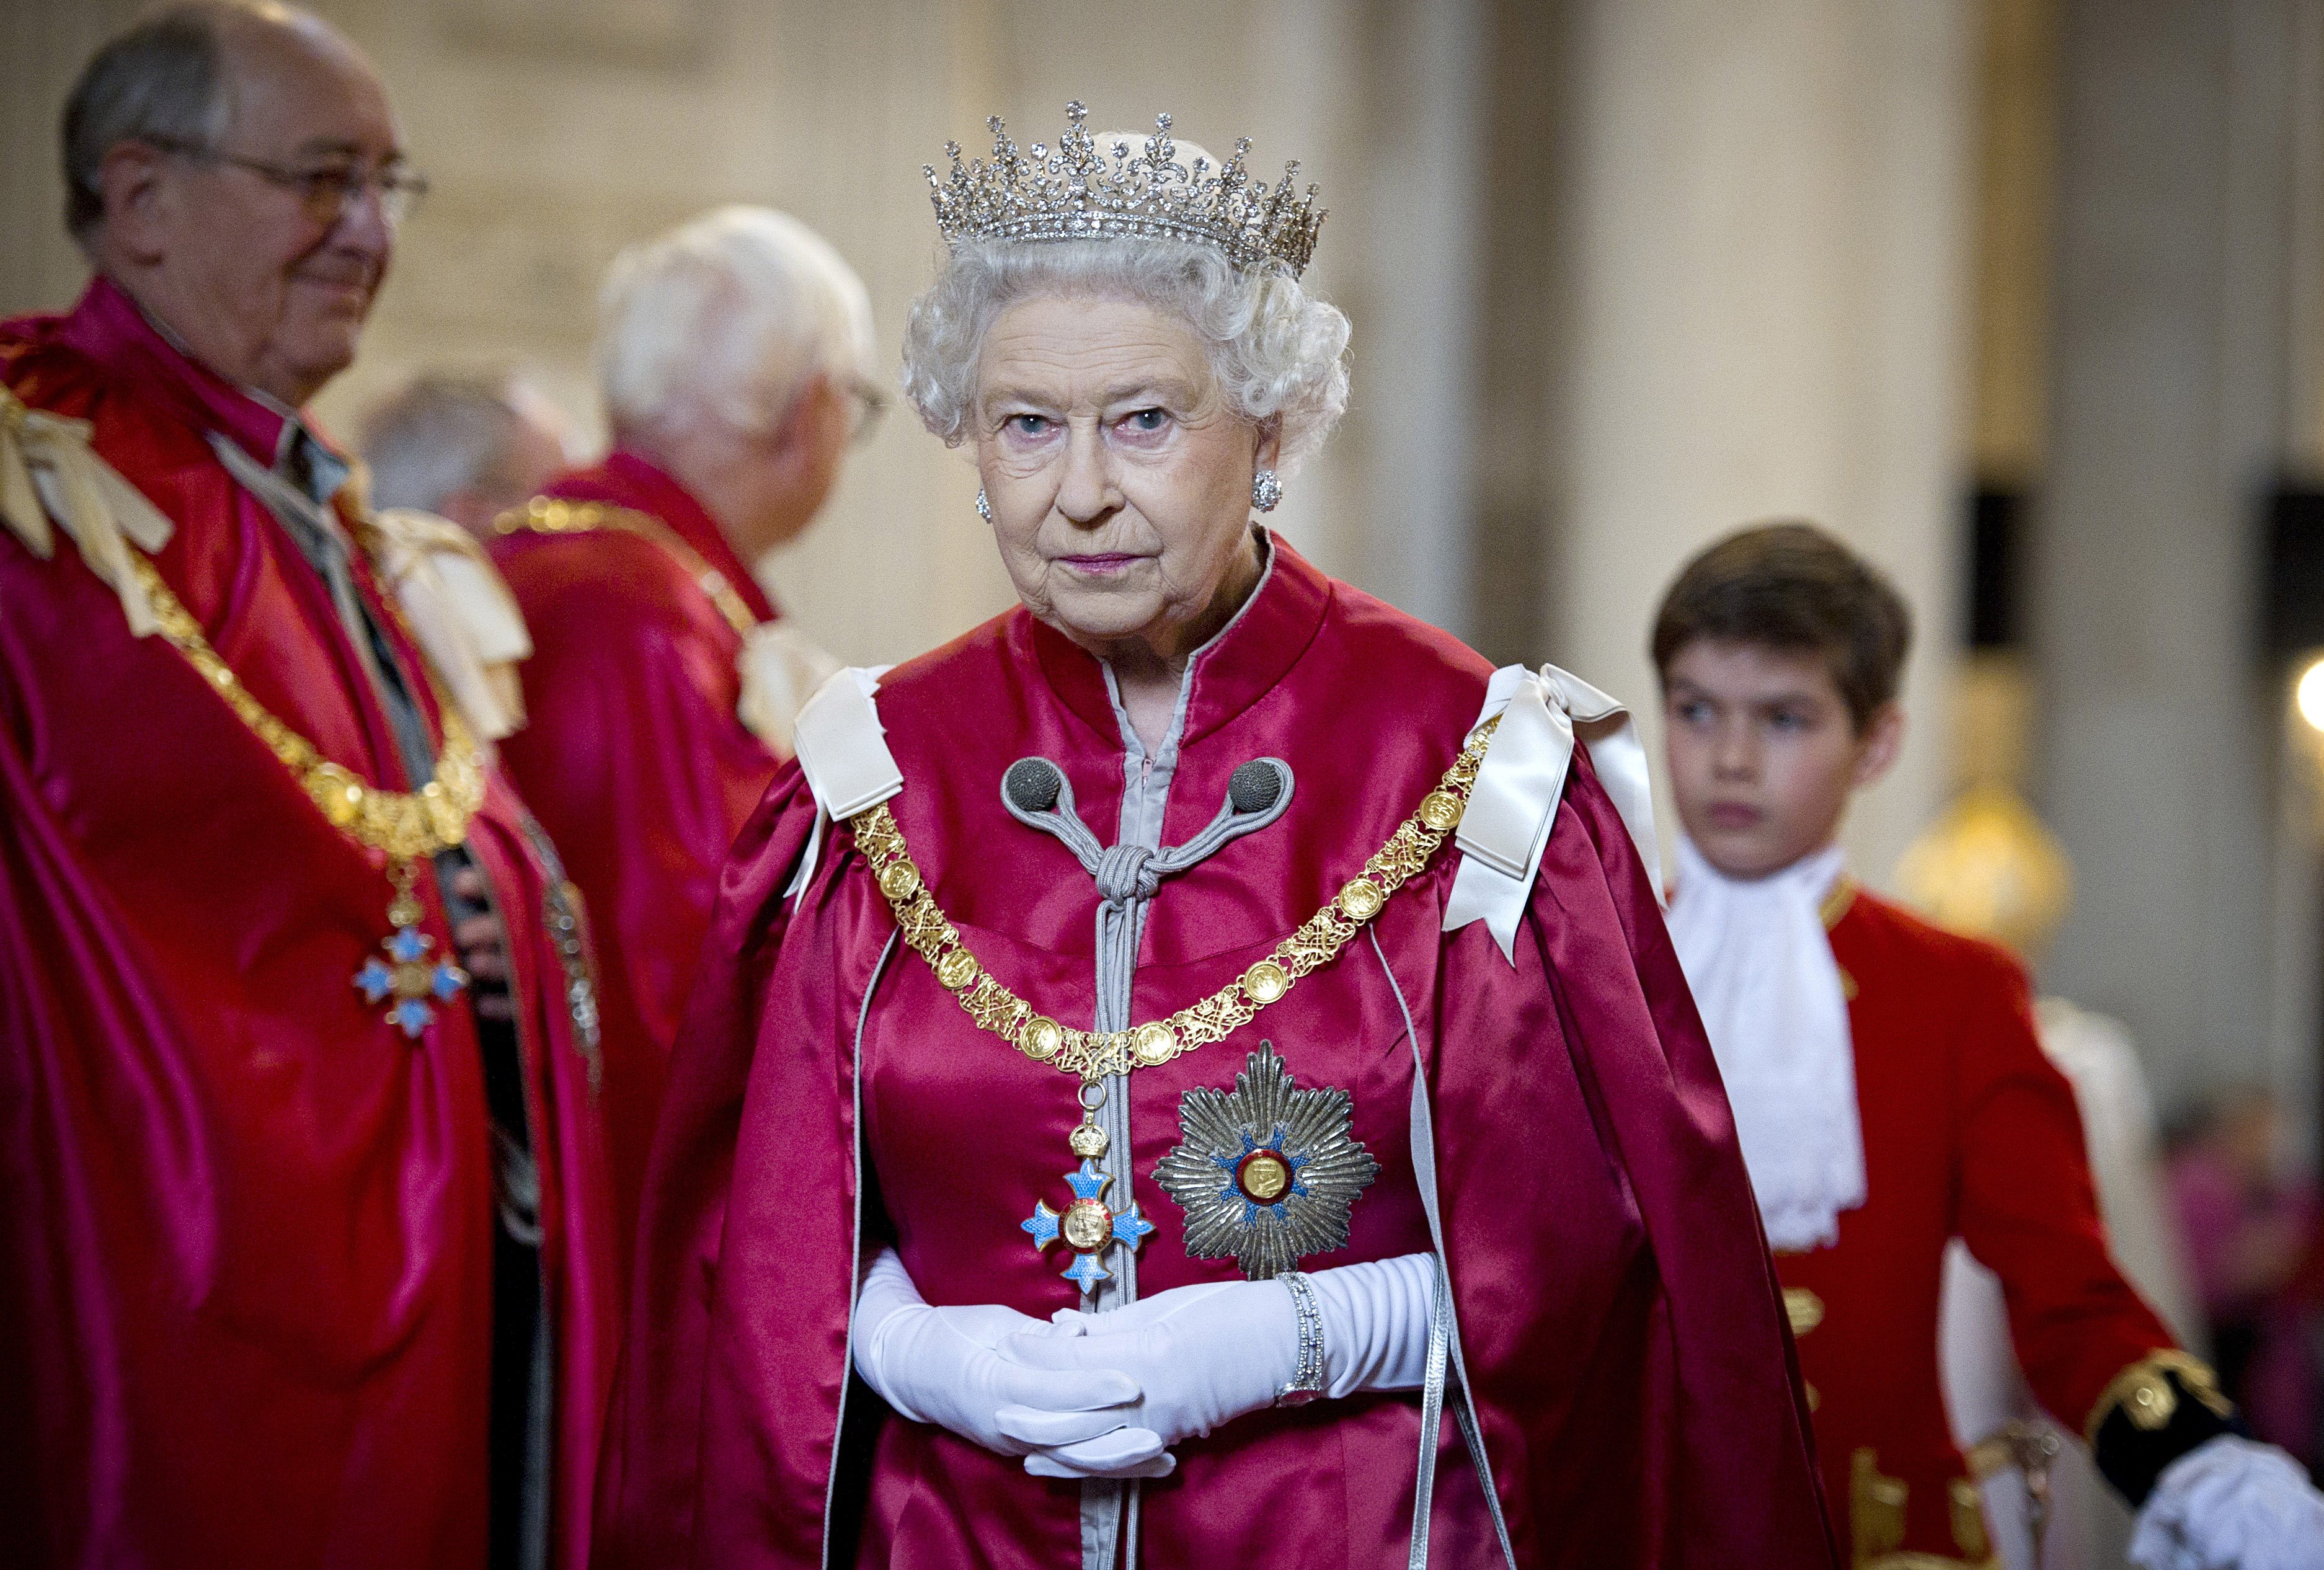 Queen Elizabeth II at a service for the Order of the British Empire on March 7, 2012, in London, England | Source: Getty Images